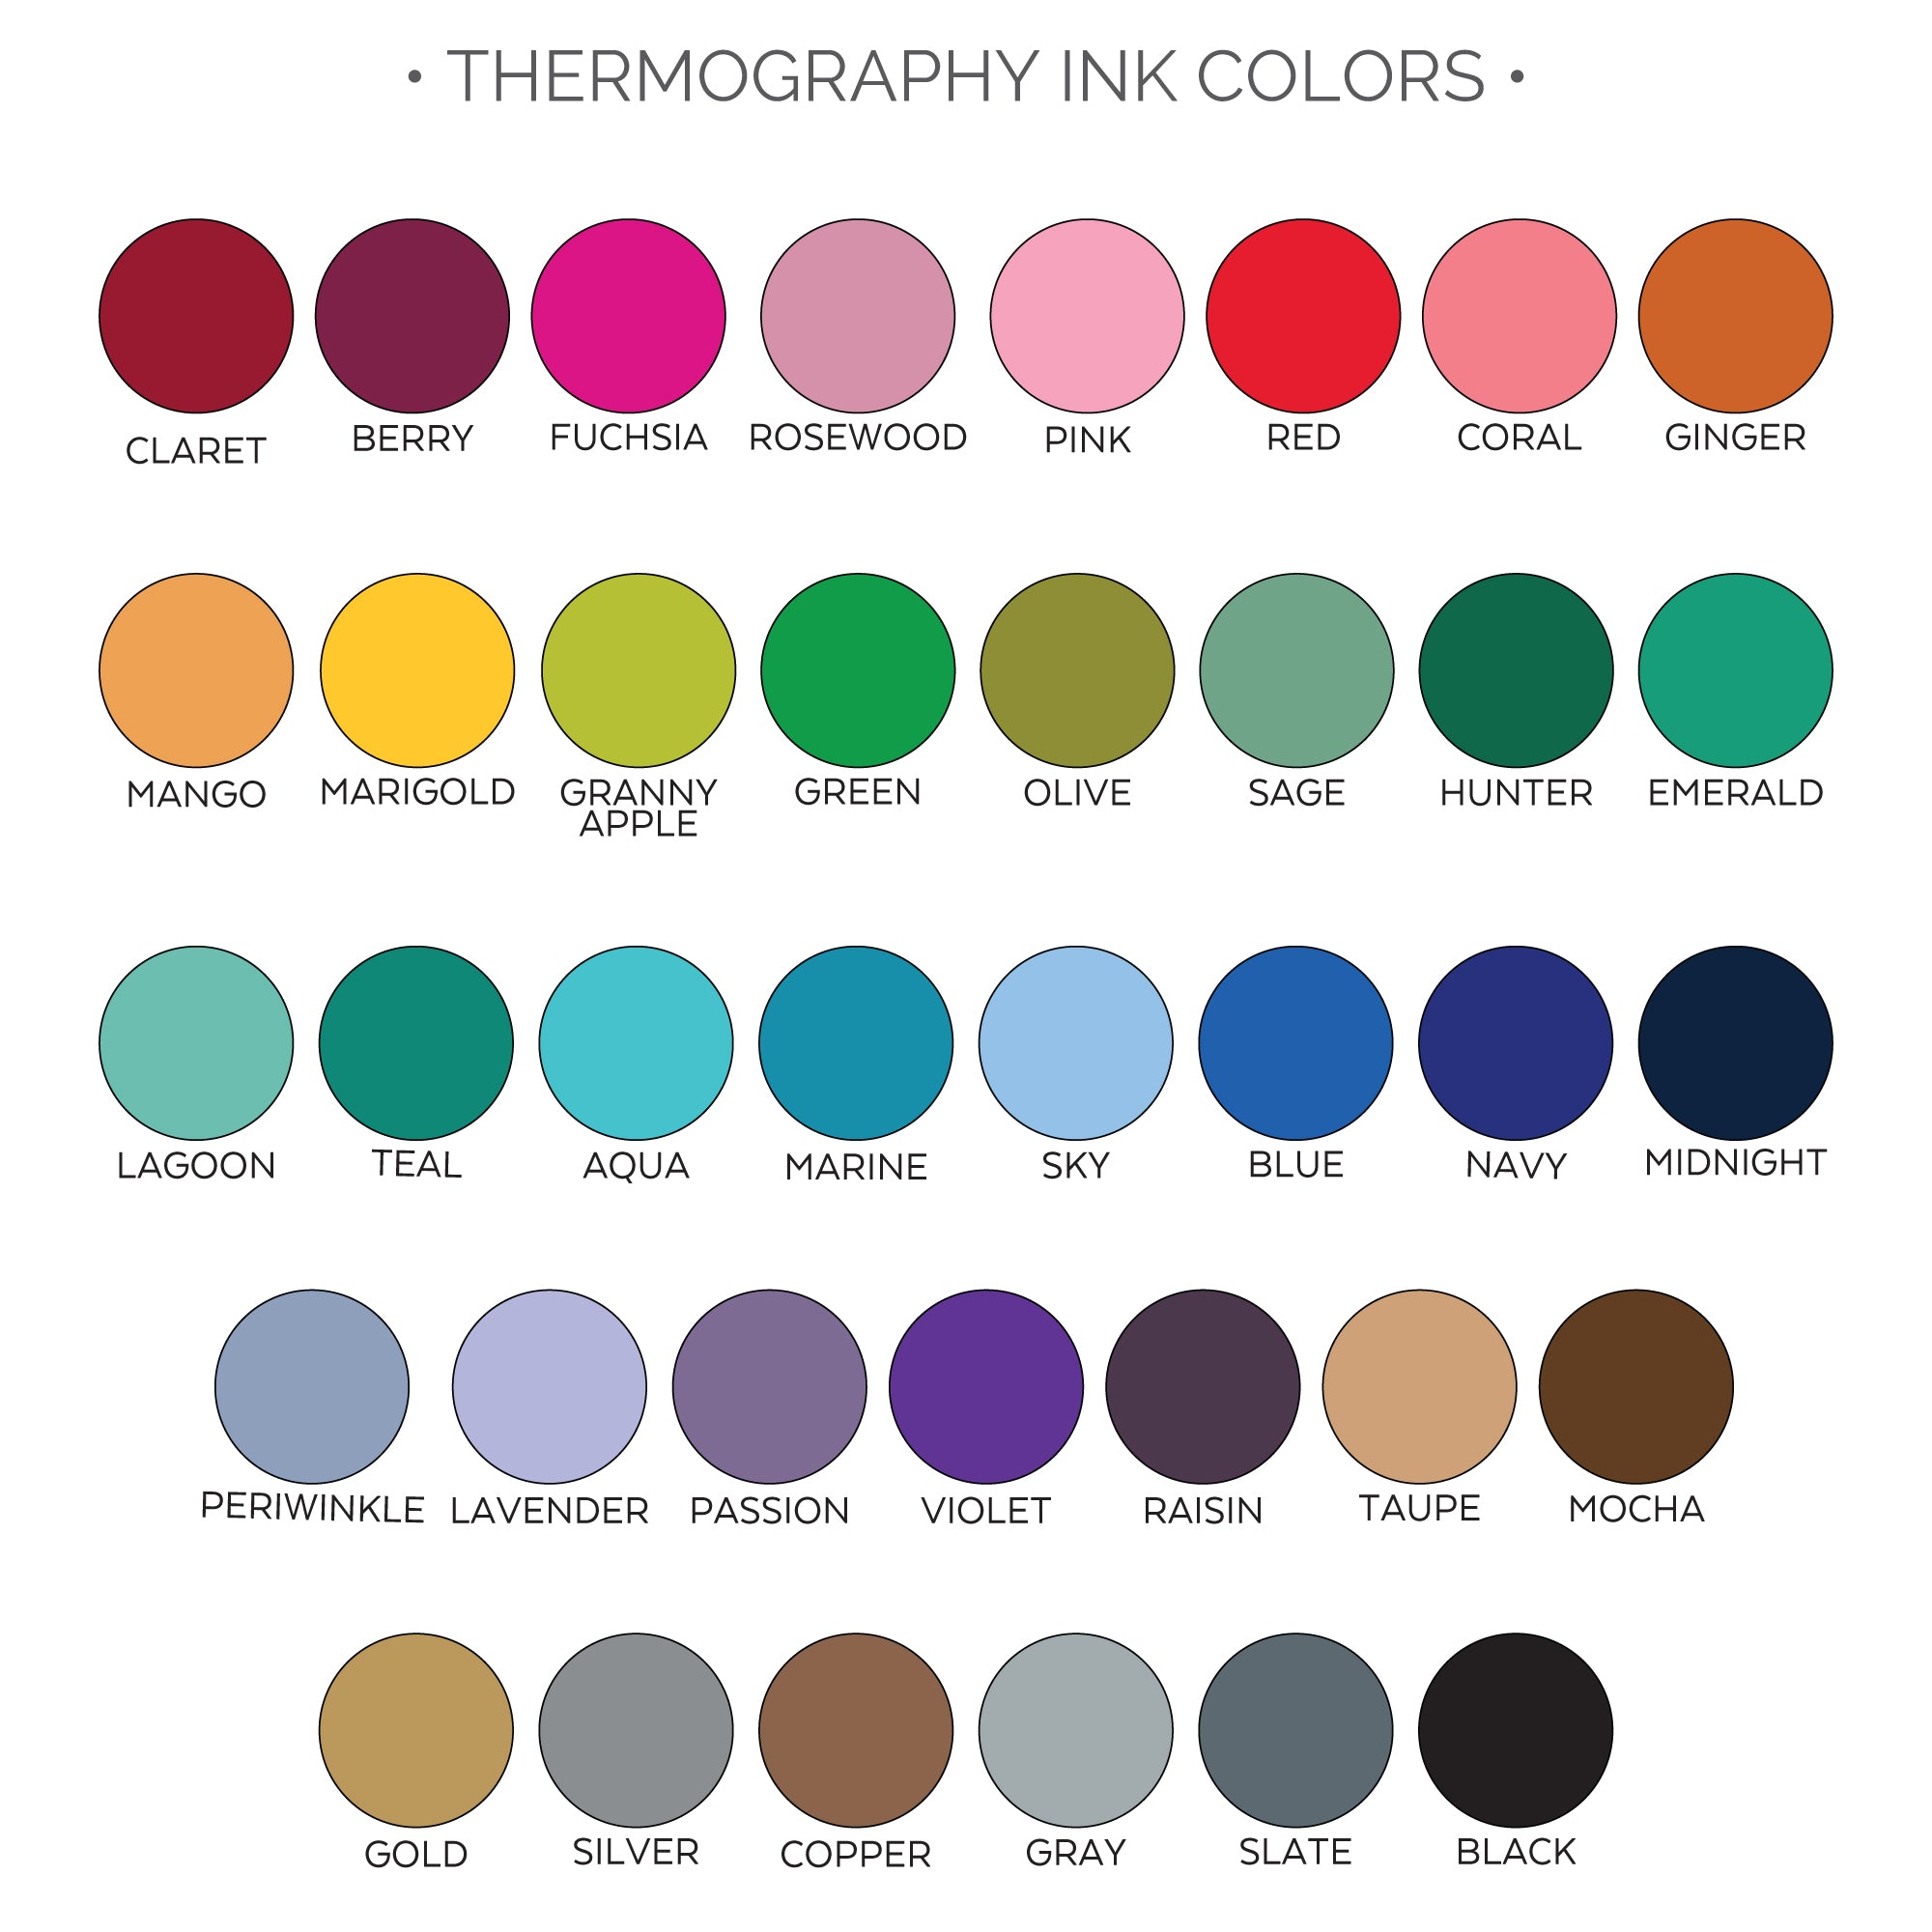 thermography ink colors